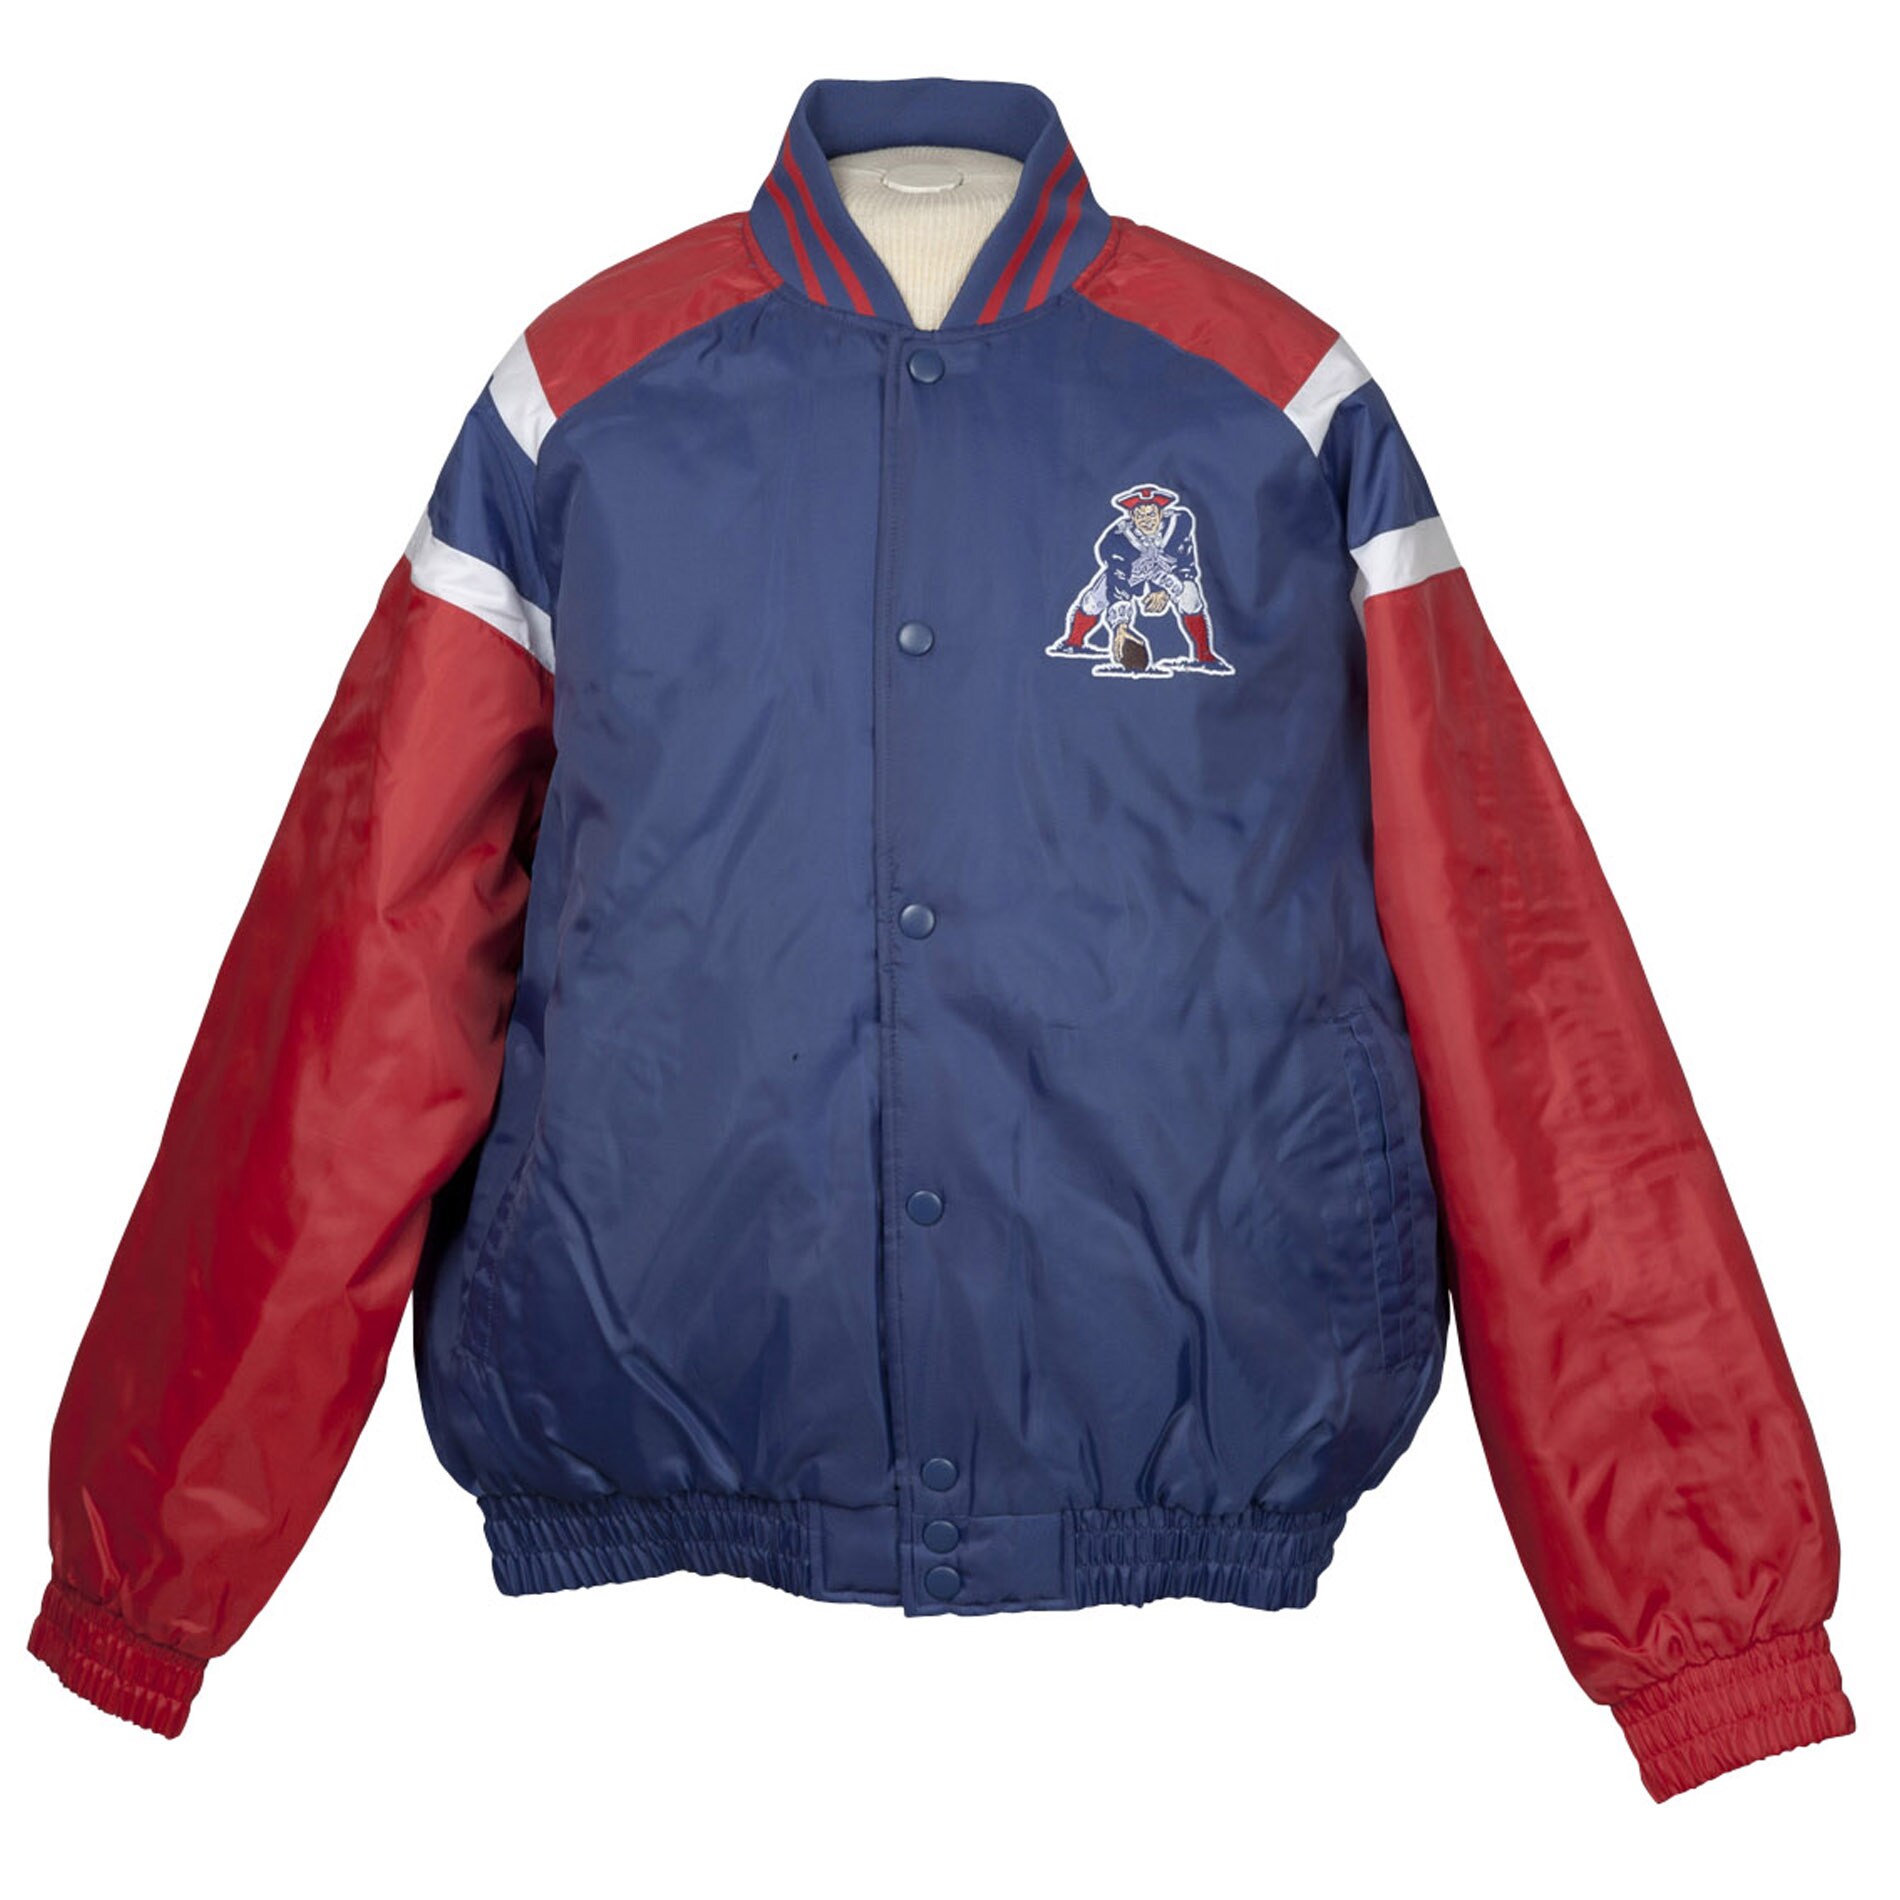 New England Patriots Heavy Weight Throwback Winter Jacket - 14018525 ...